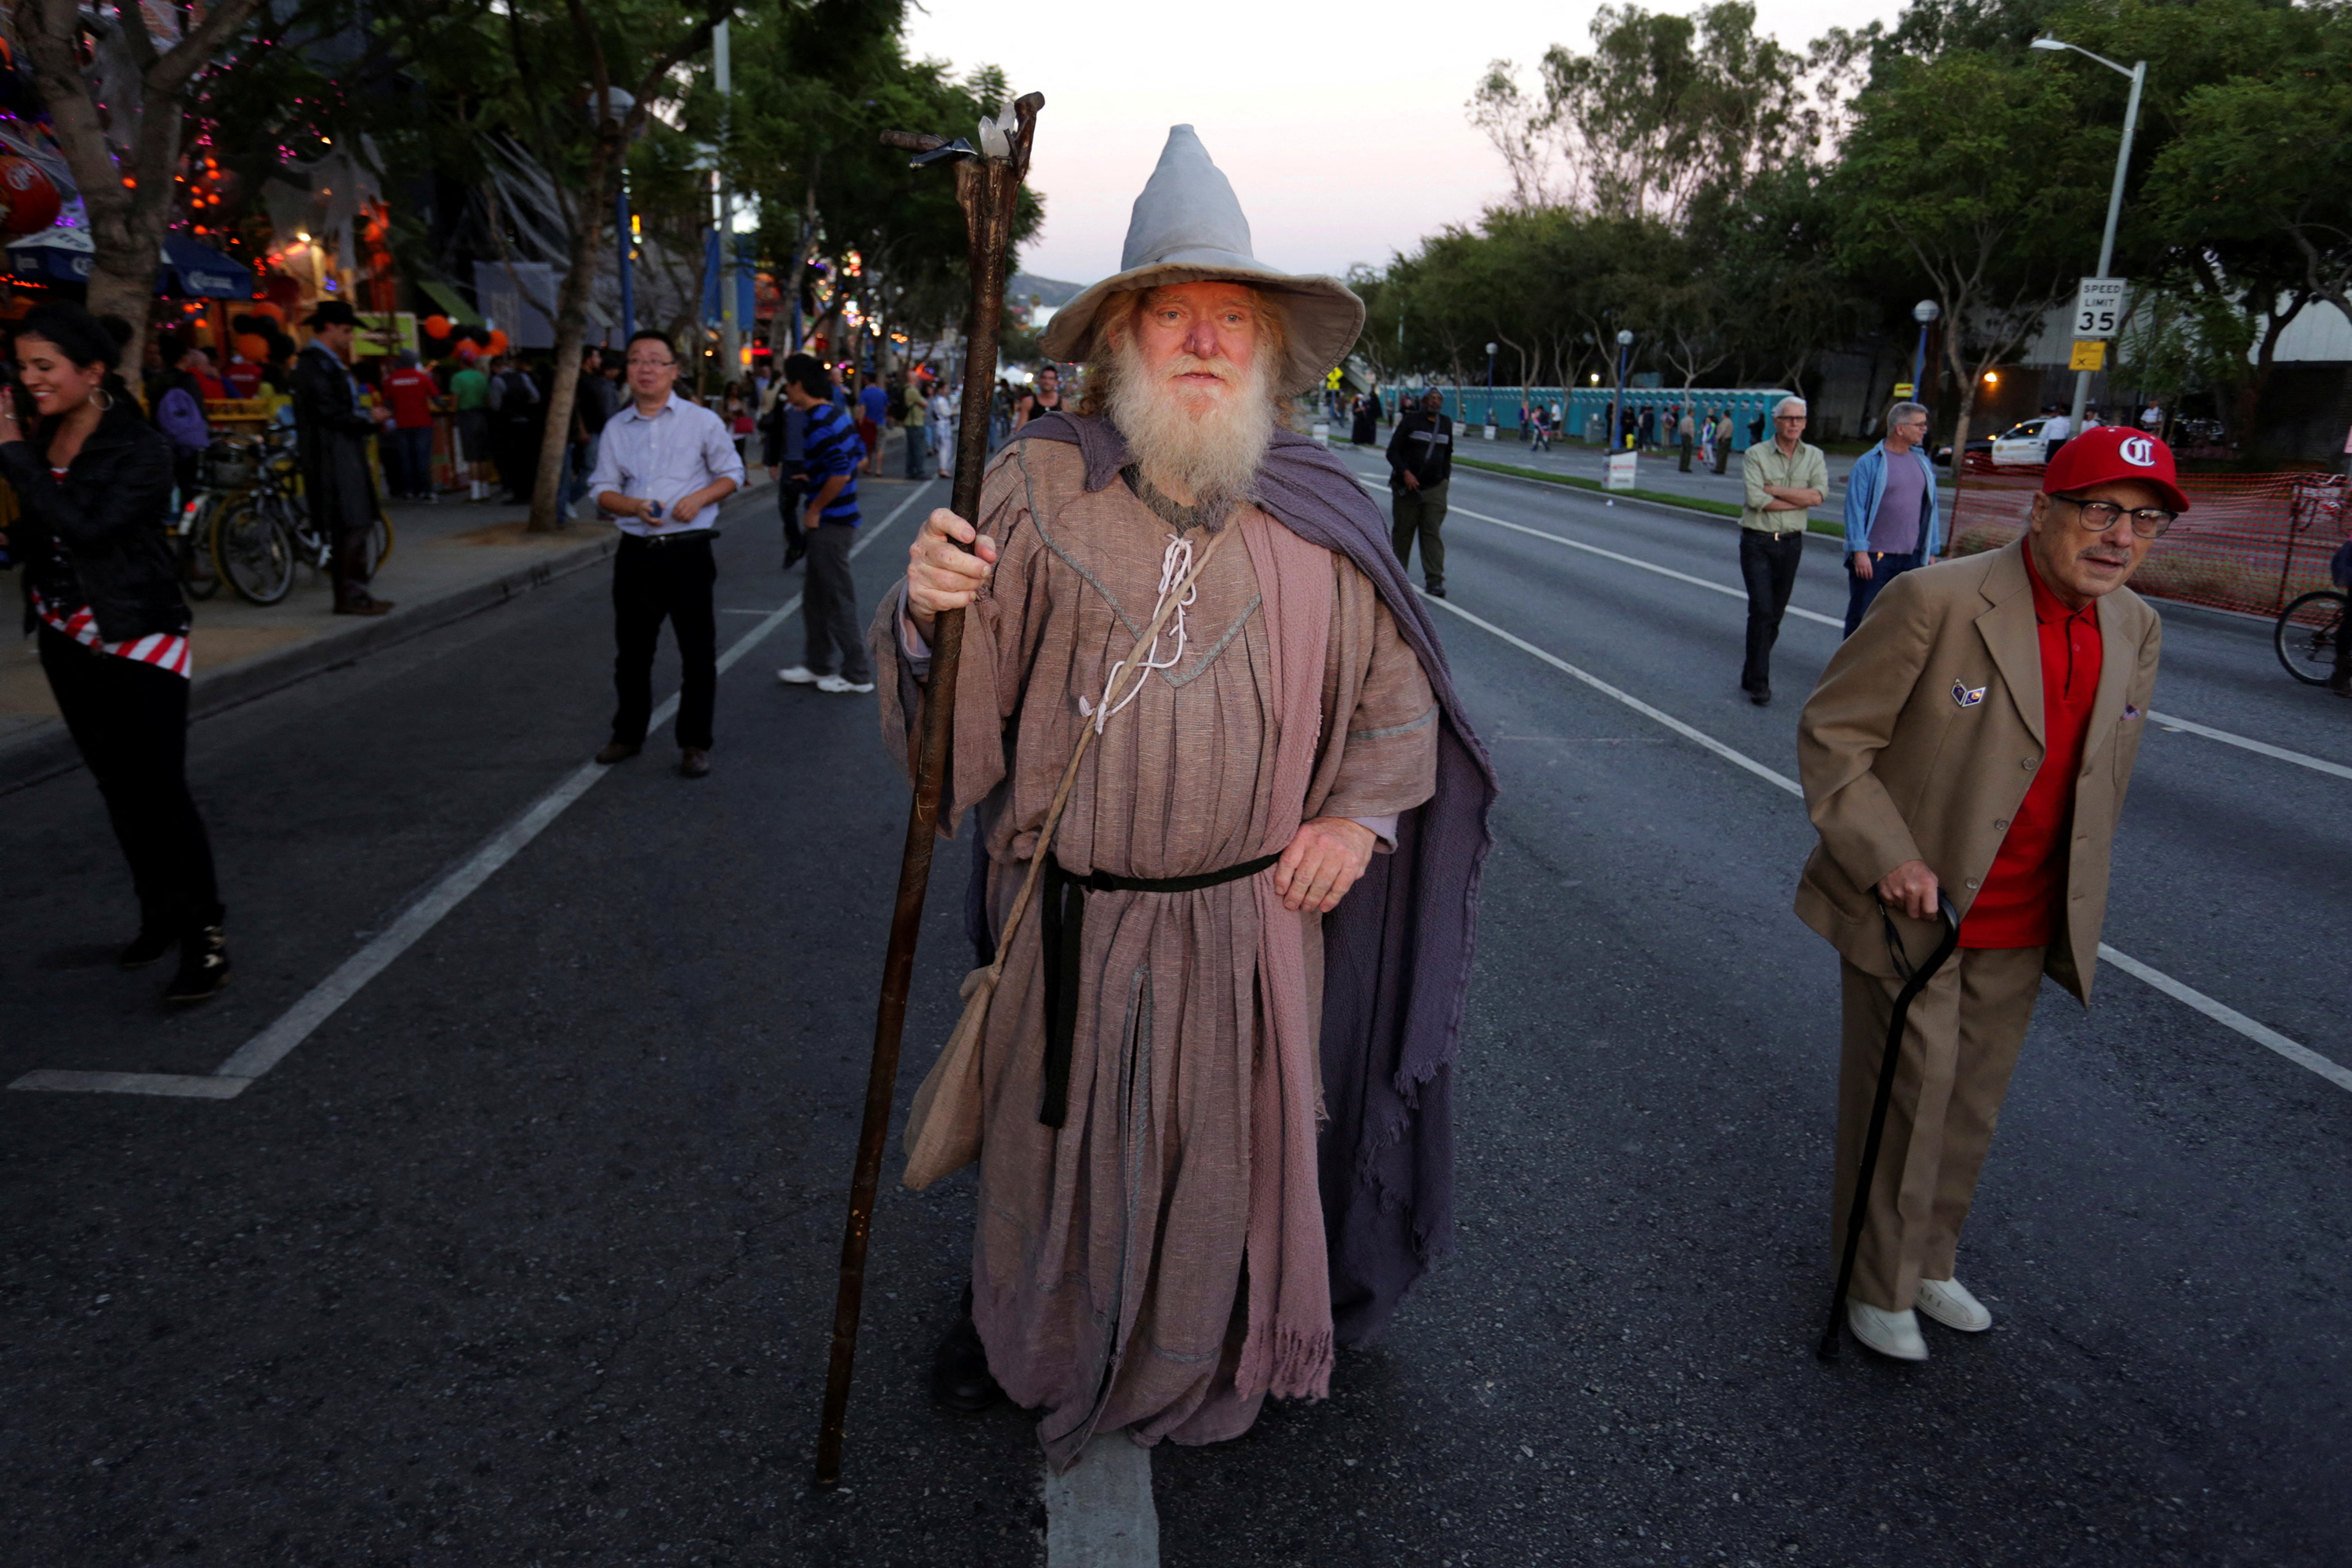 A man dressed as the character Gandalf the Grey from 